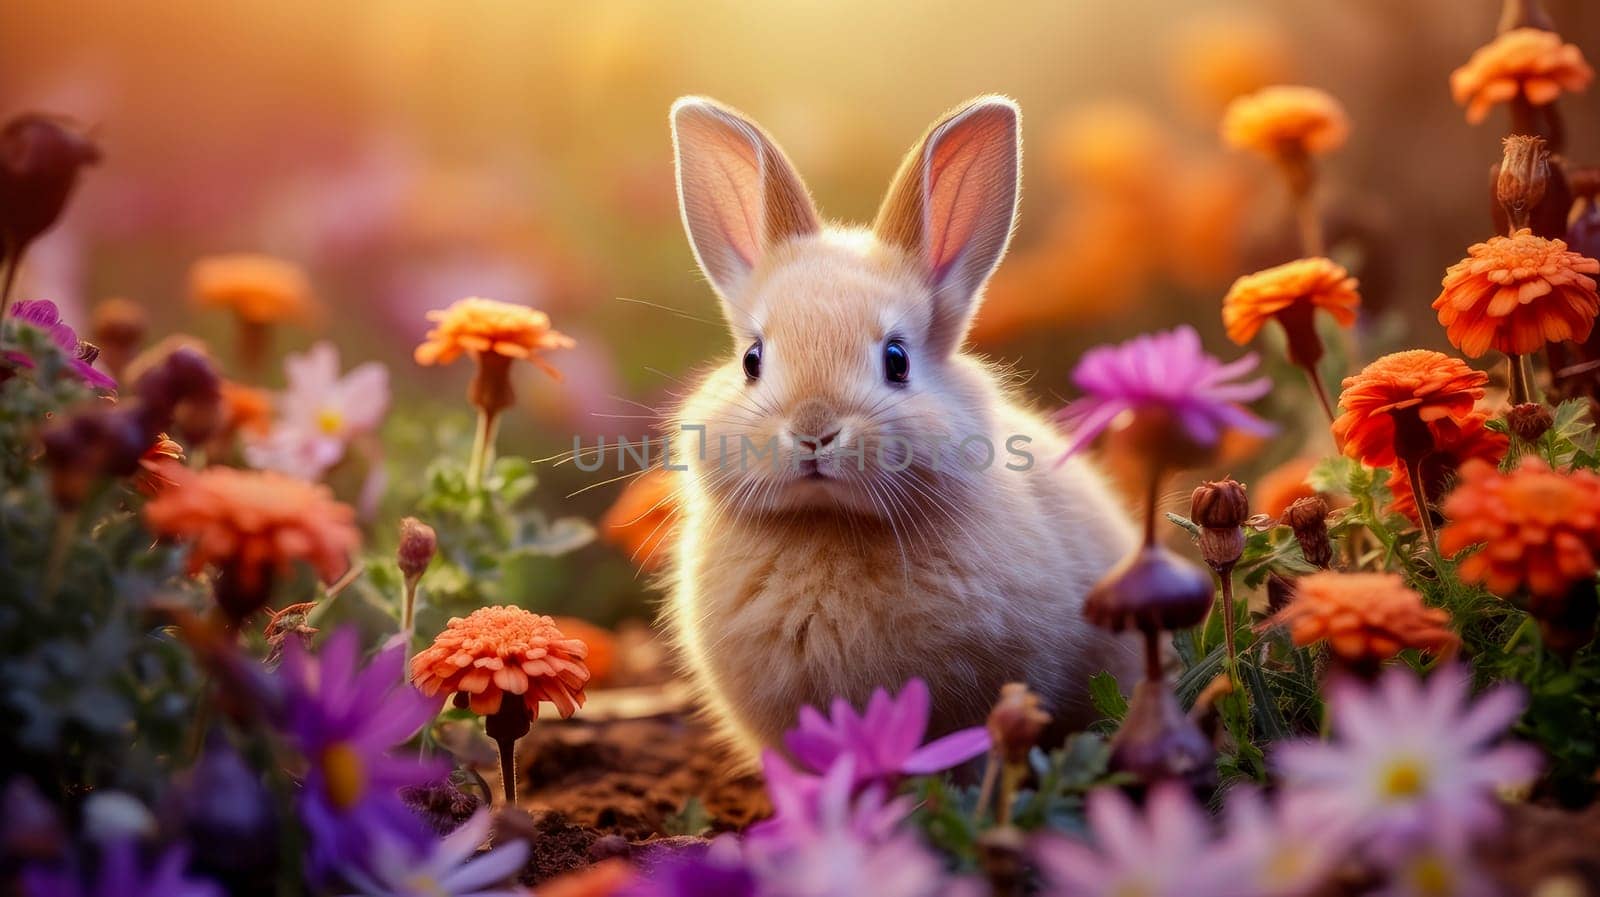 Cute Easter bunny in a field with flowers in nature, in the sun's rays. by Alla_Yurtayeva